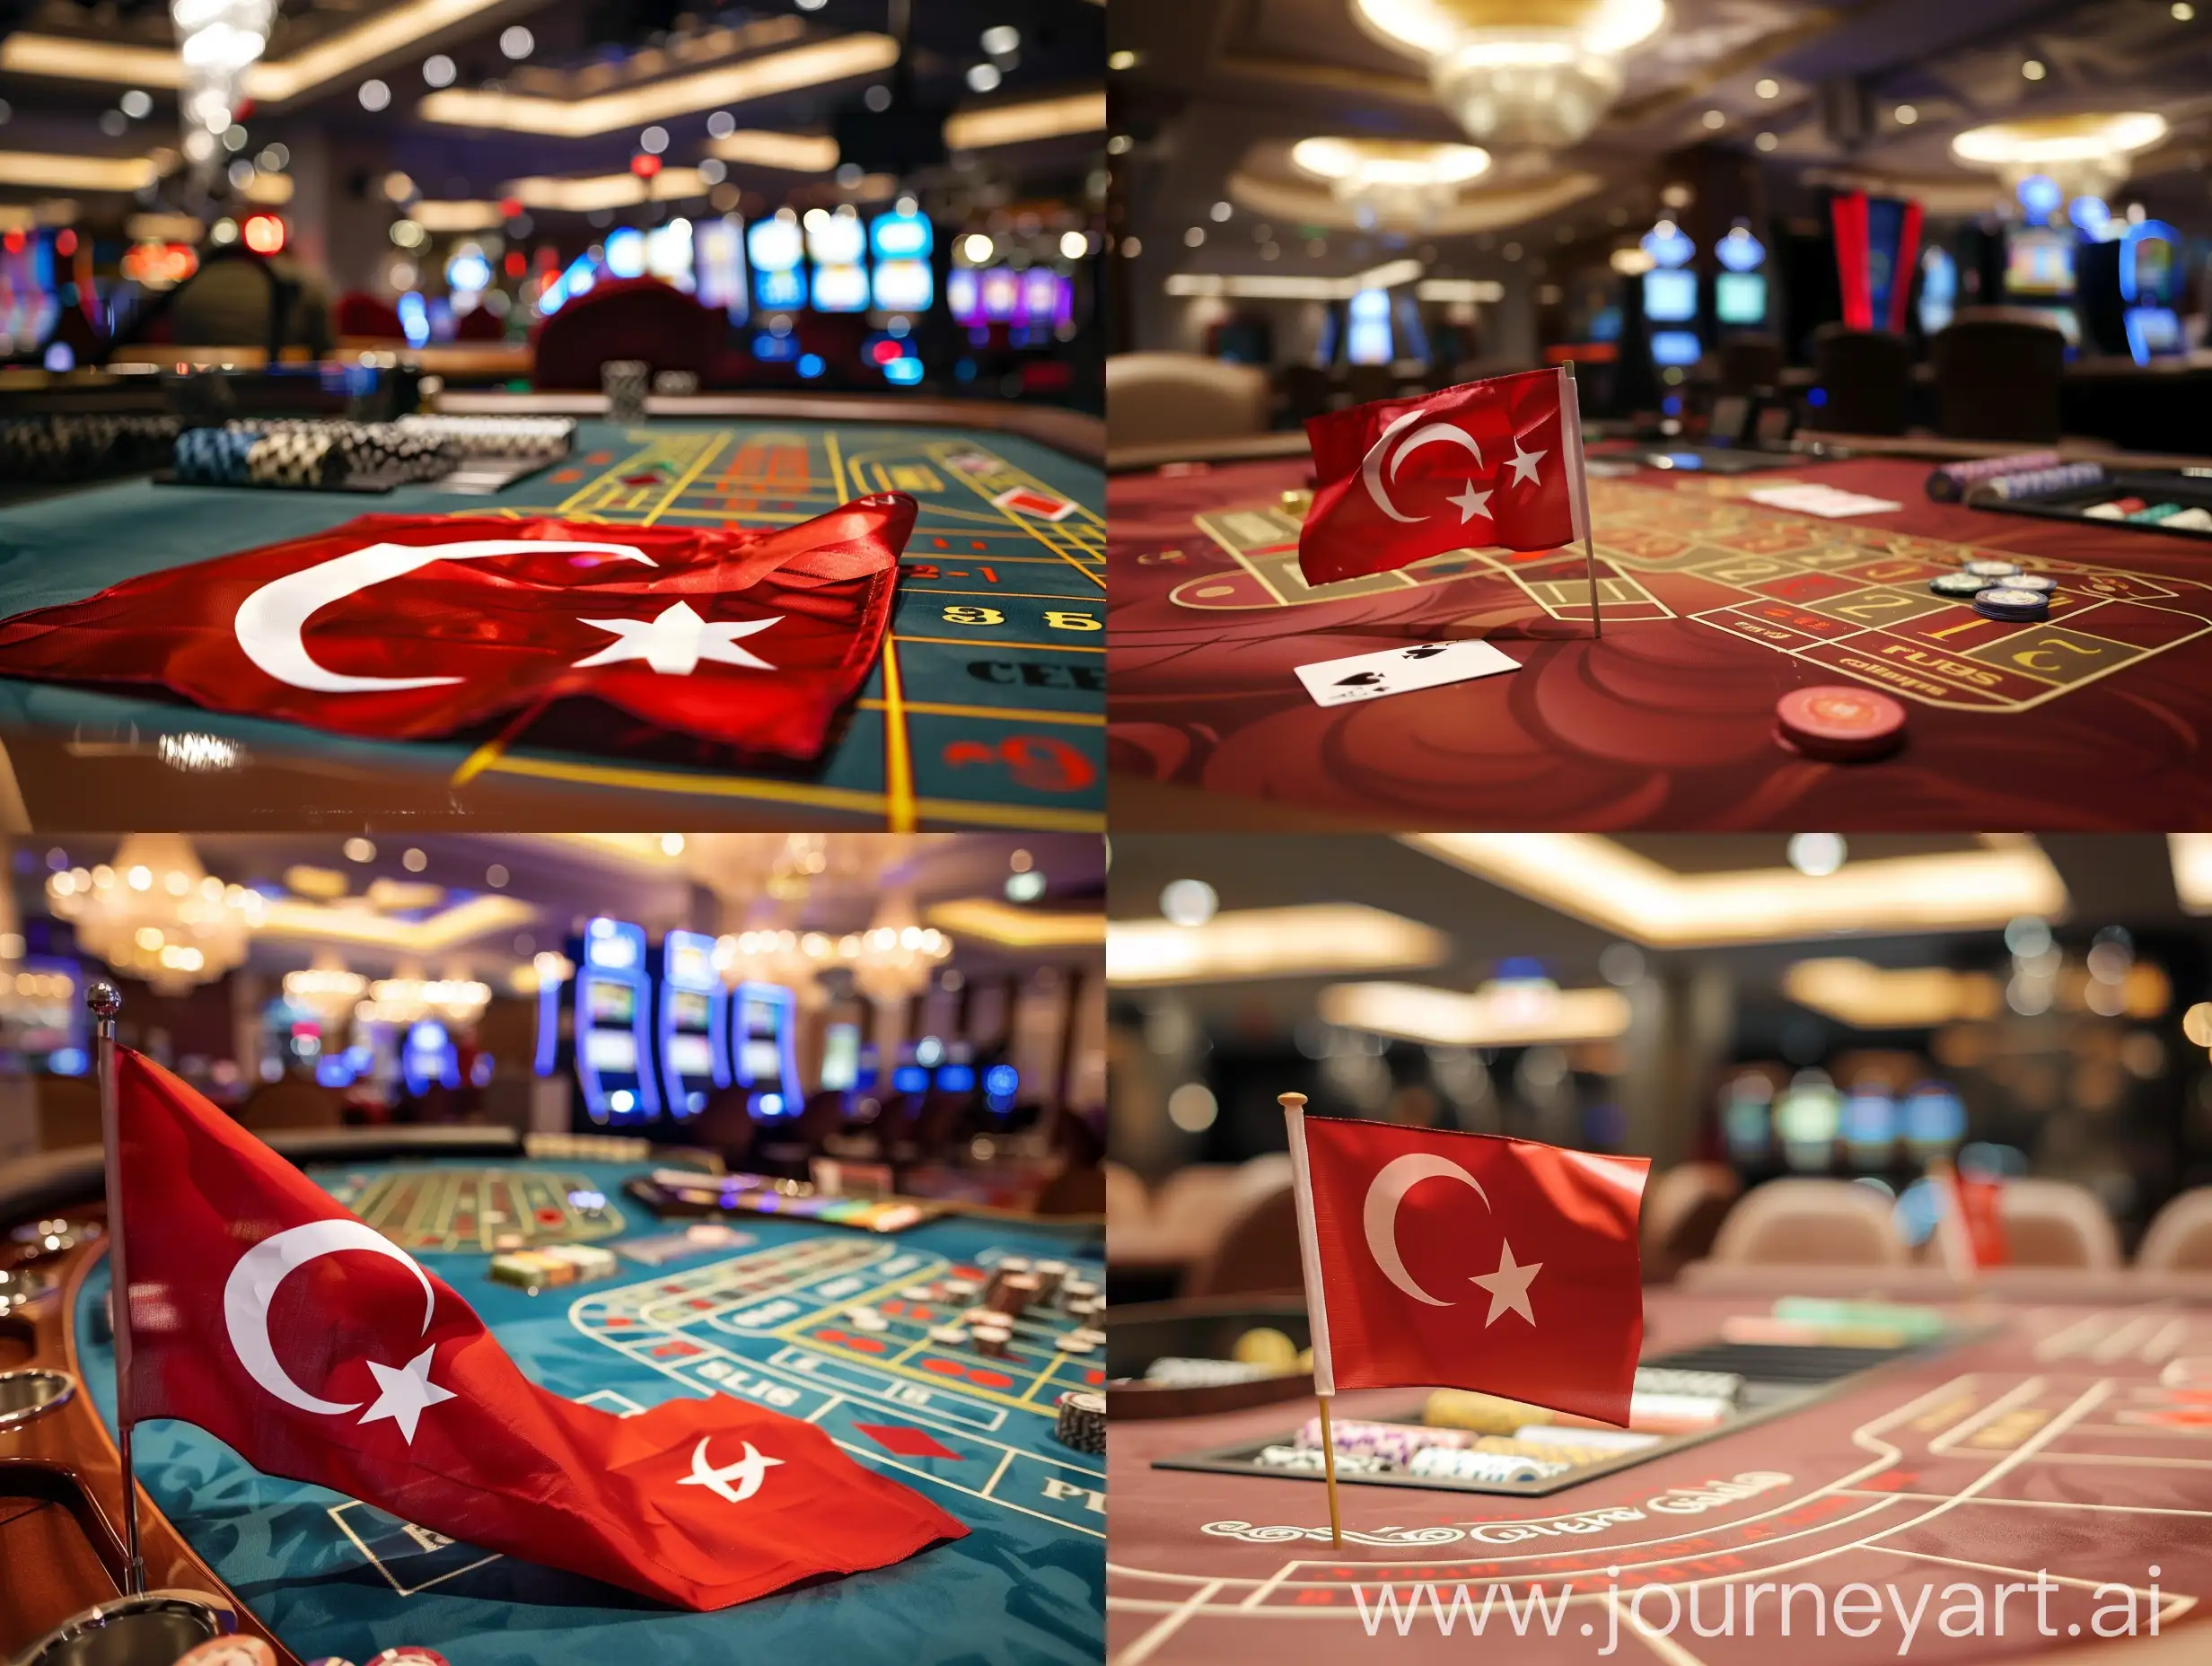 Turkish-Flag-Displayed-on-a-Casino-Table